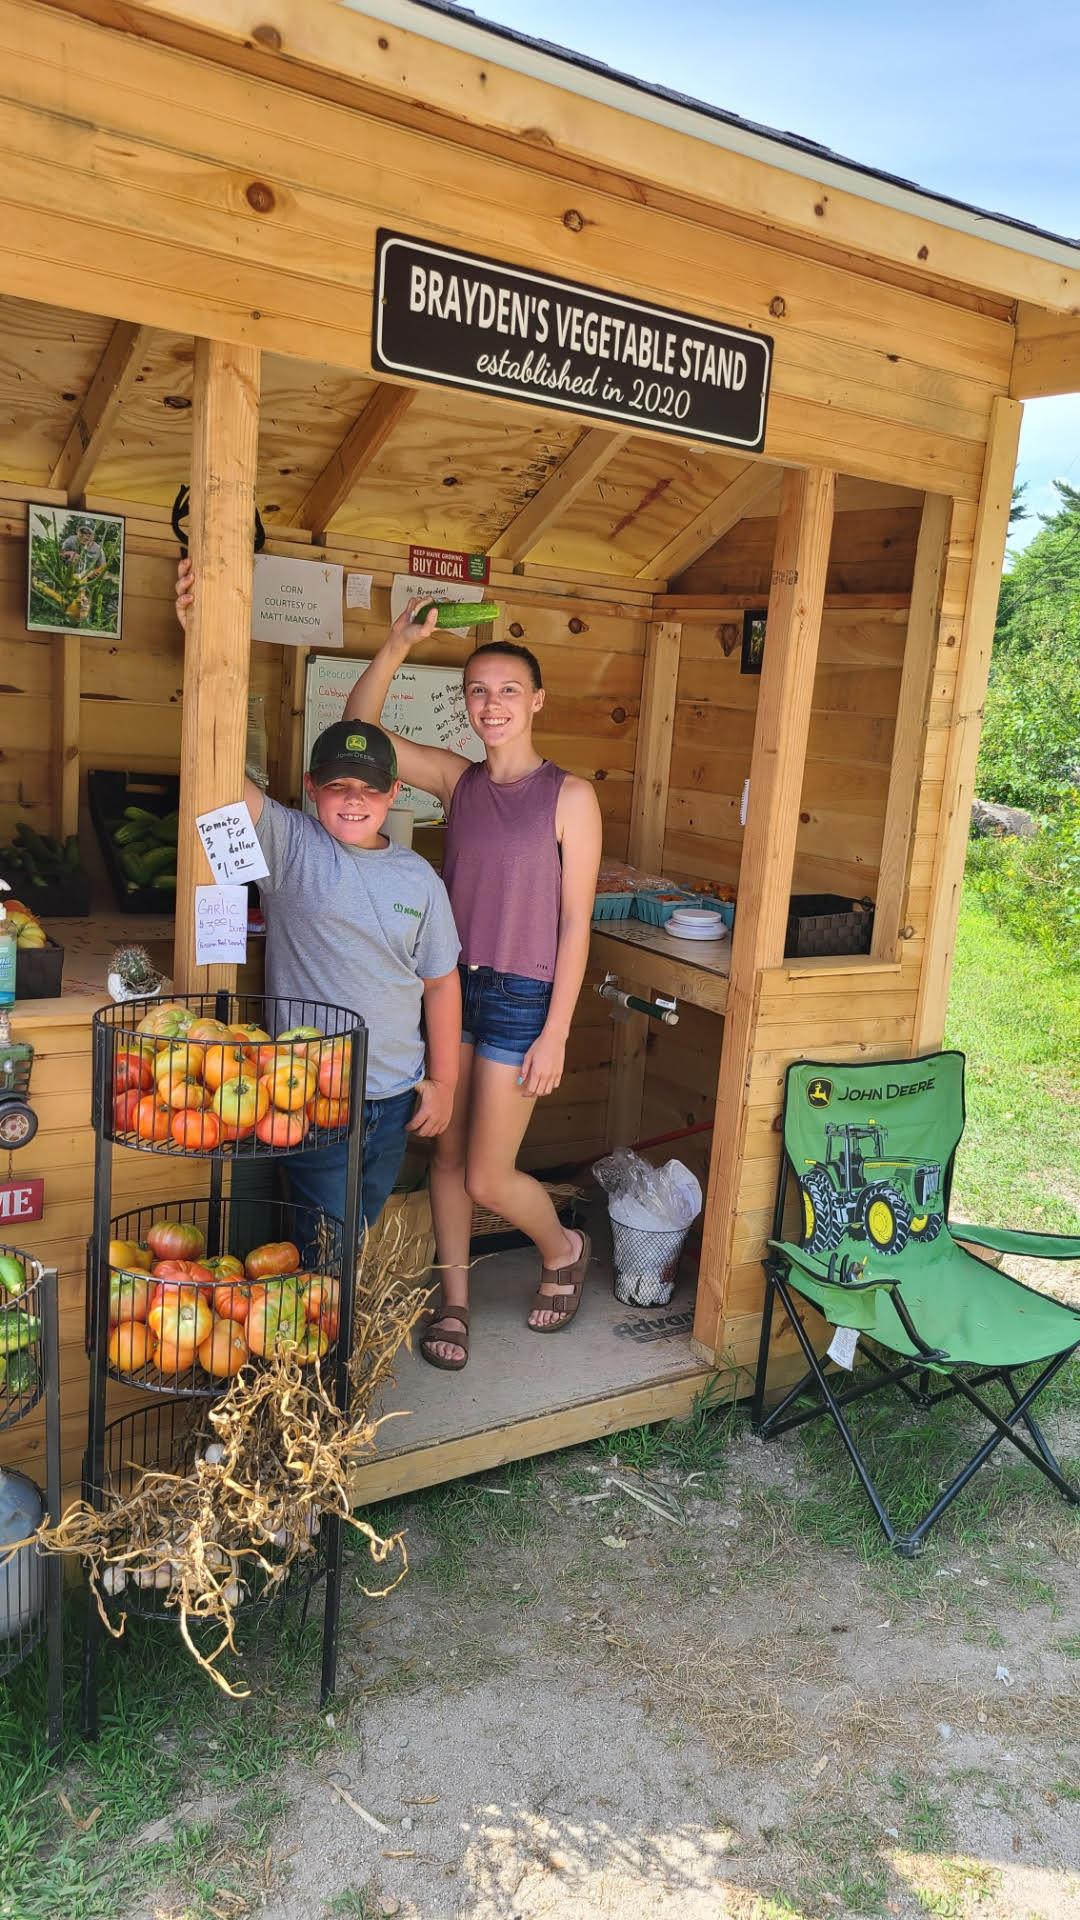 Brayden and his sister Emma at his produce stand, Brayden’s Vegetable Stand. (Courtesy of <a href="https://www.facebook.com/braydensvegetablestand">Kari Nadeau</a>)